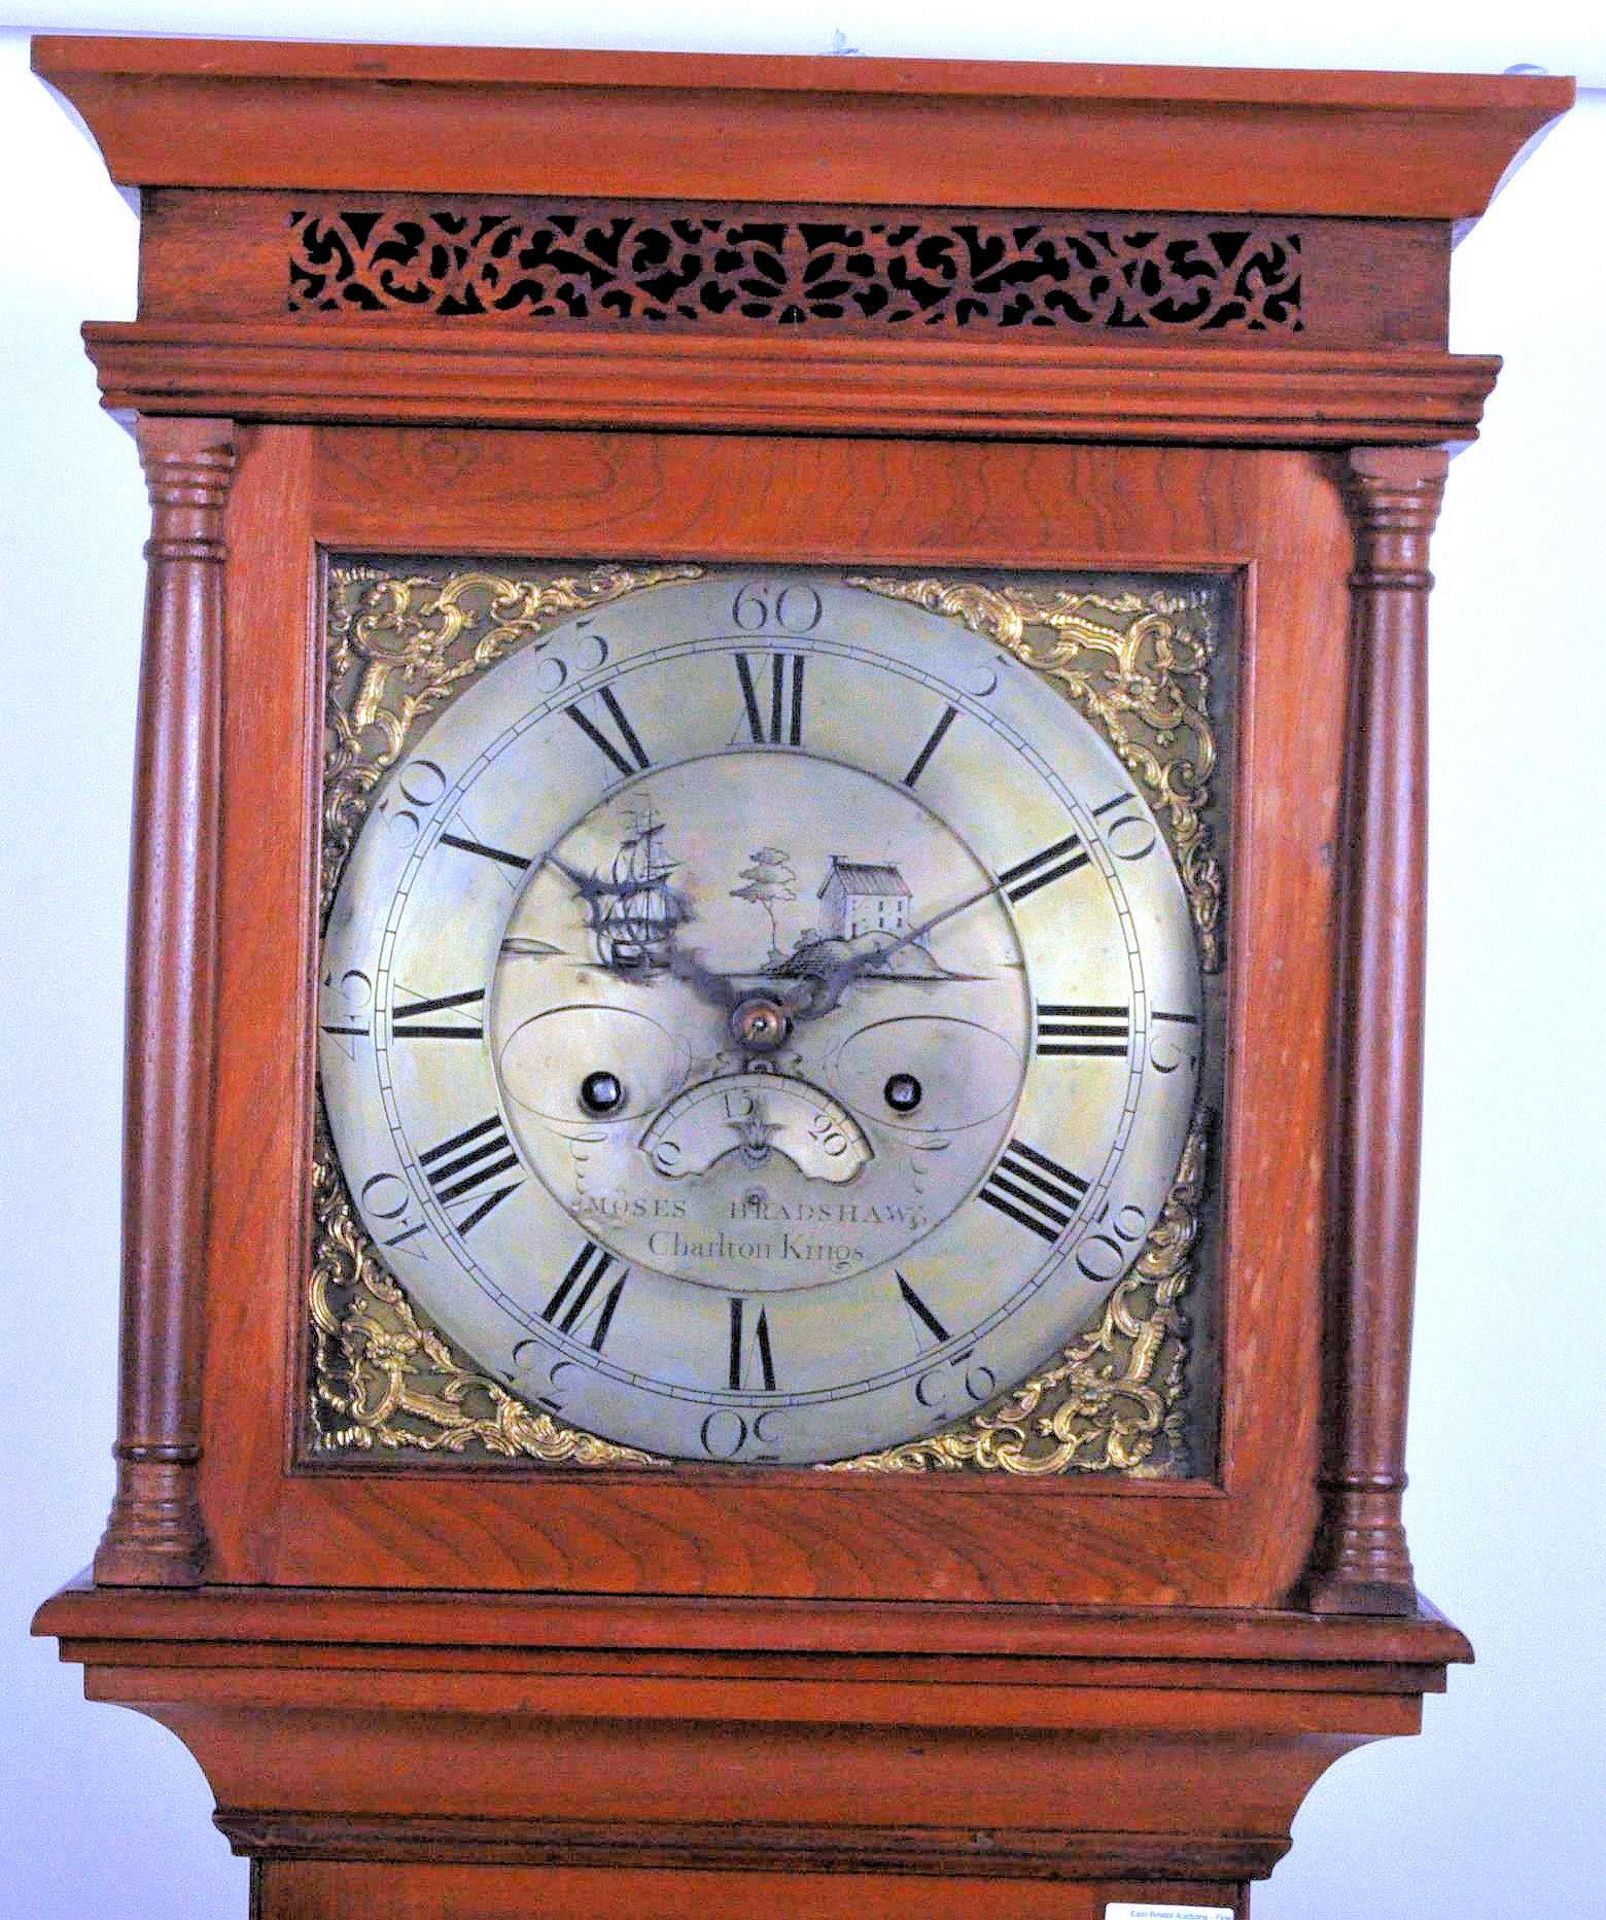 18TH CENTURY WEST COUNTRY MOSES OF BRADSHAW LONGCASE CLOCK - Image 2 of 11